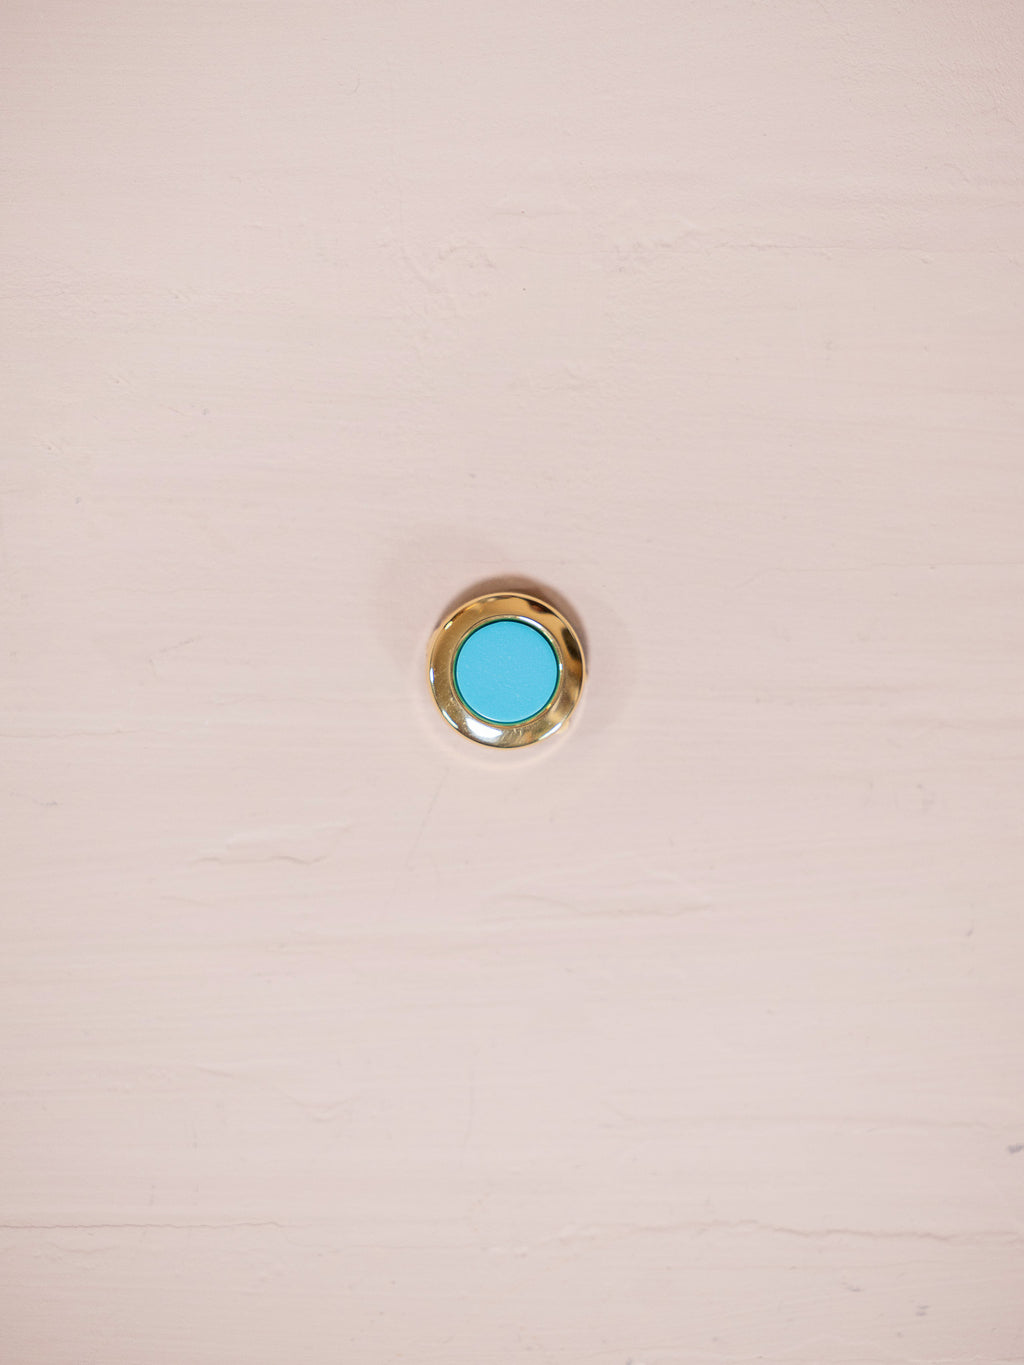 Turquoise and gold button cover on pink background.